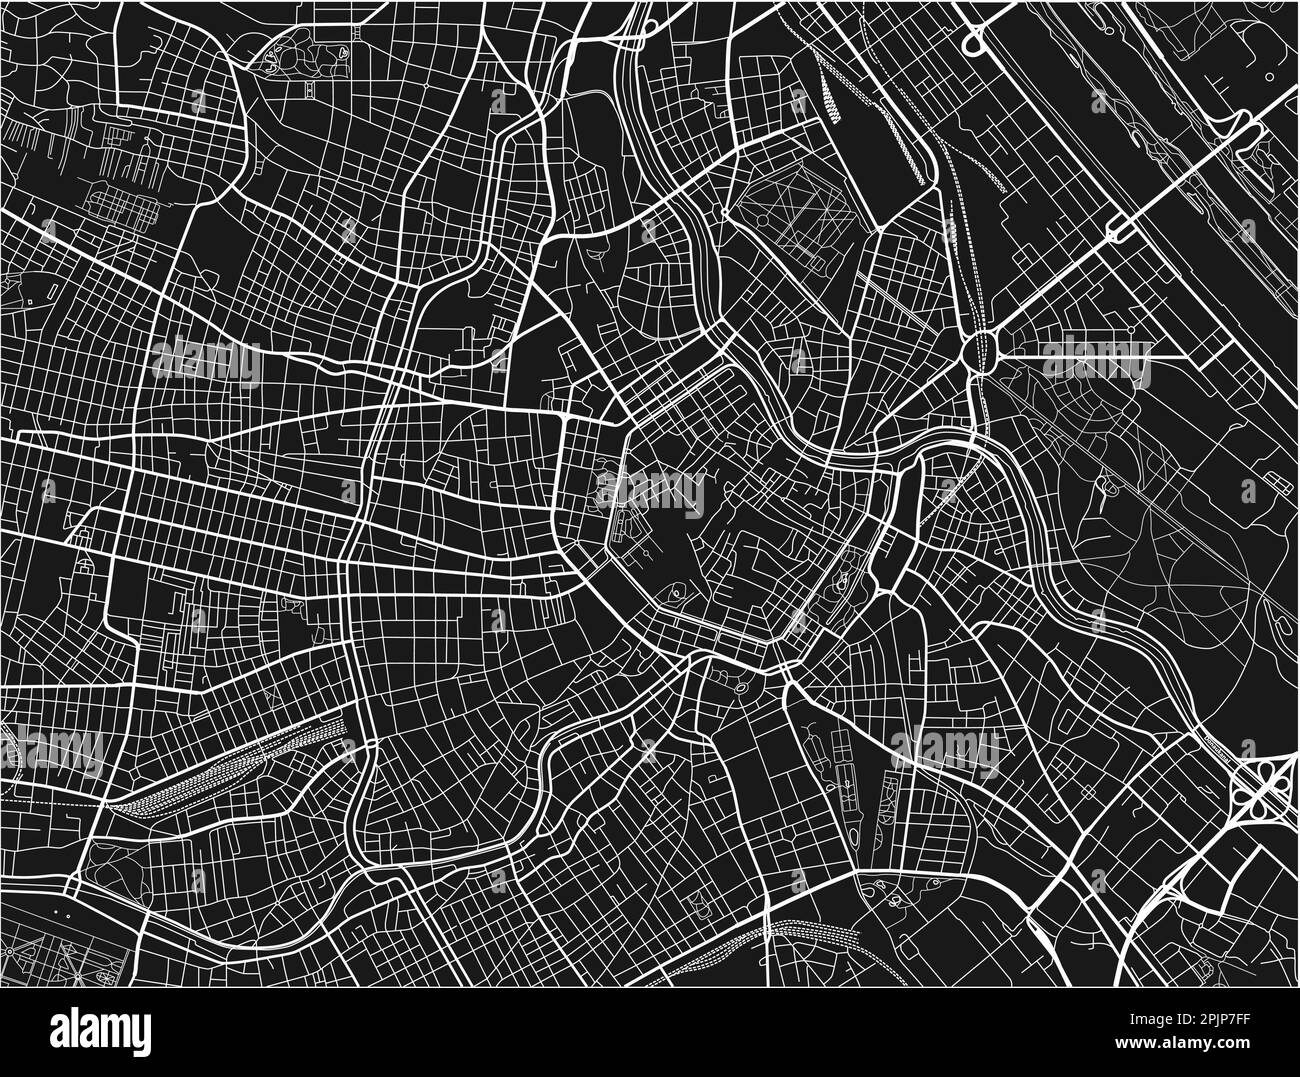 Black And White Vector City Map Of Vienna With Well Organized Separated